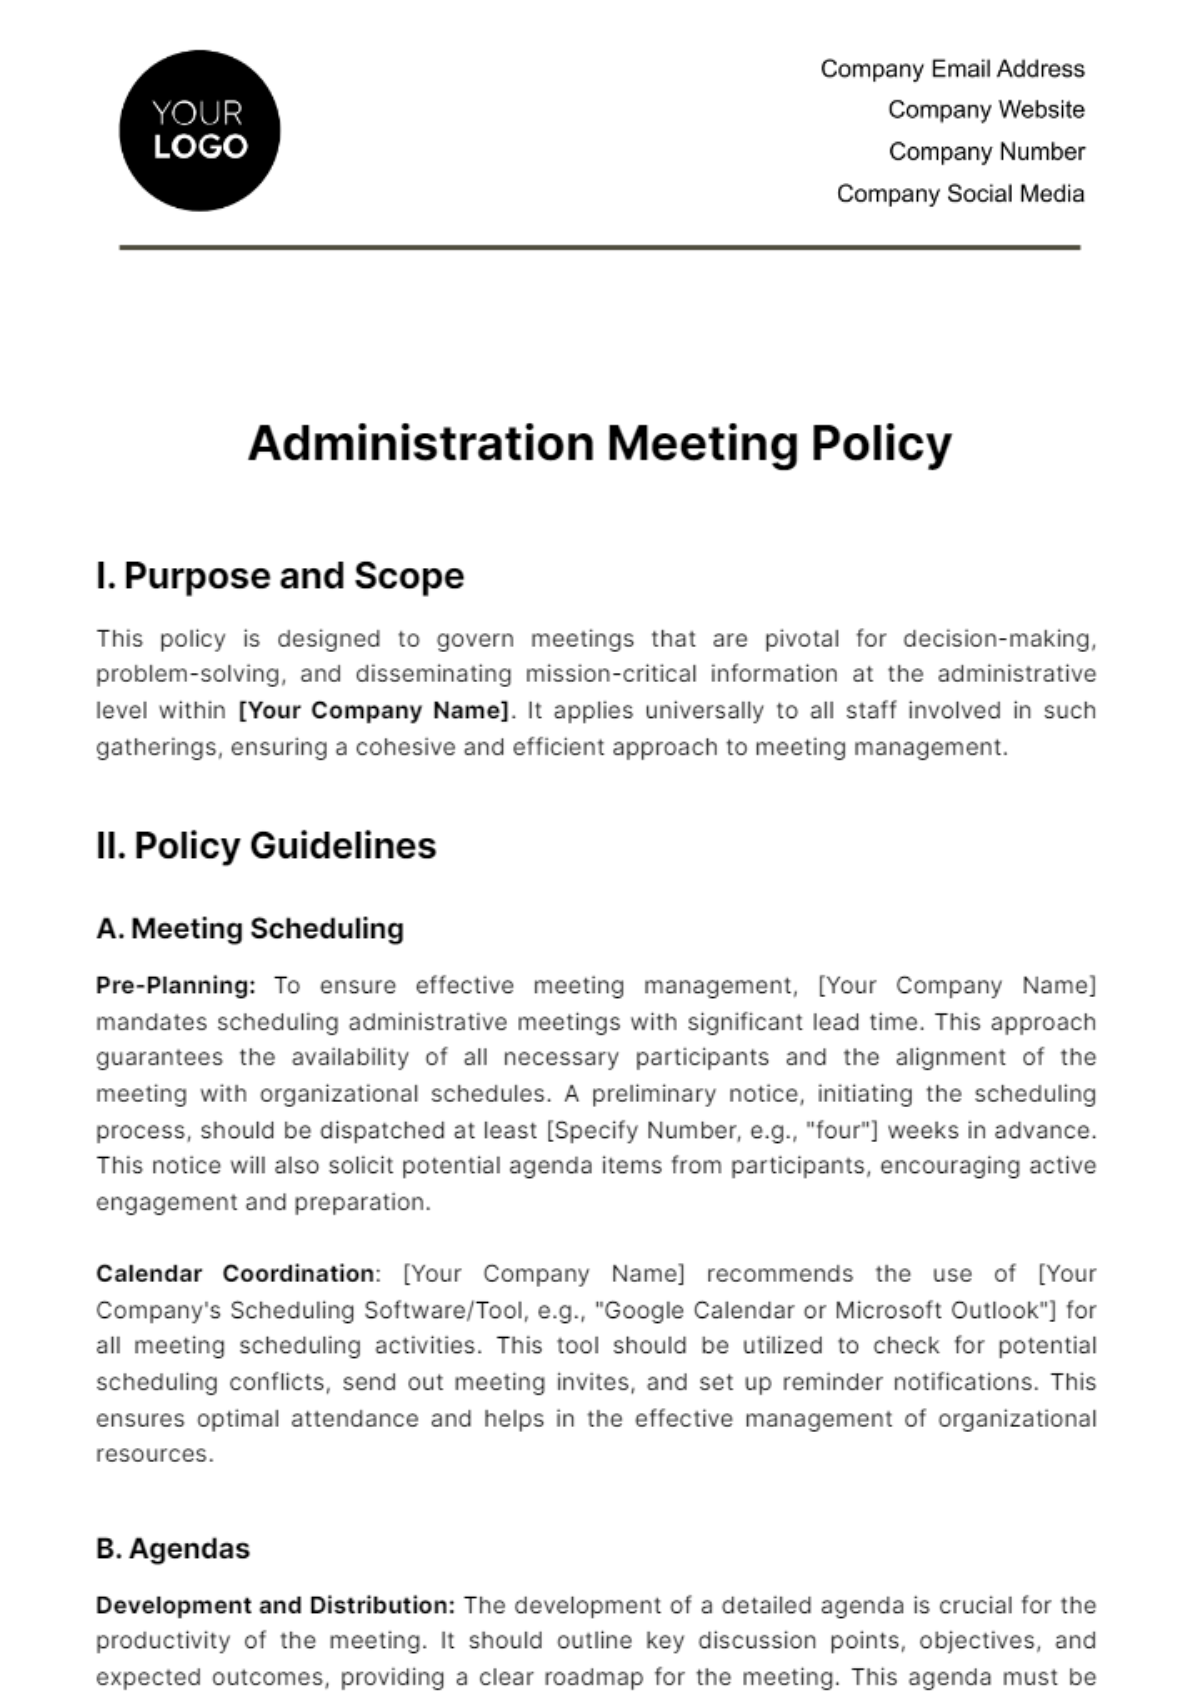 Administration Meeting Policy Template